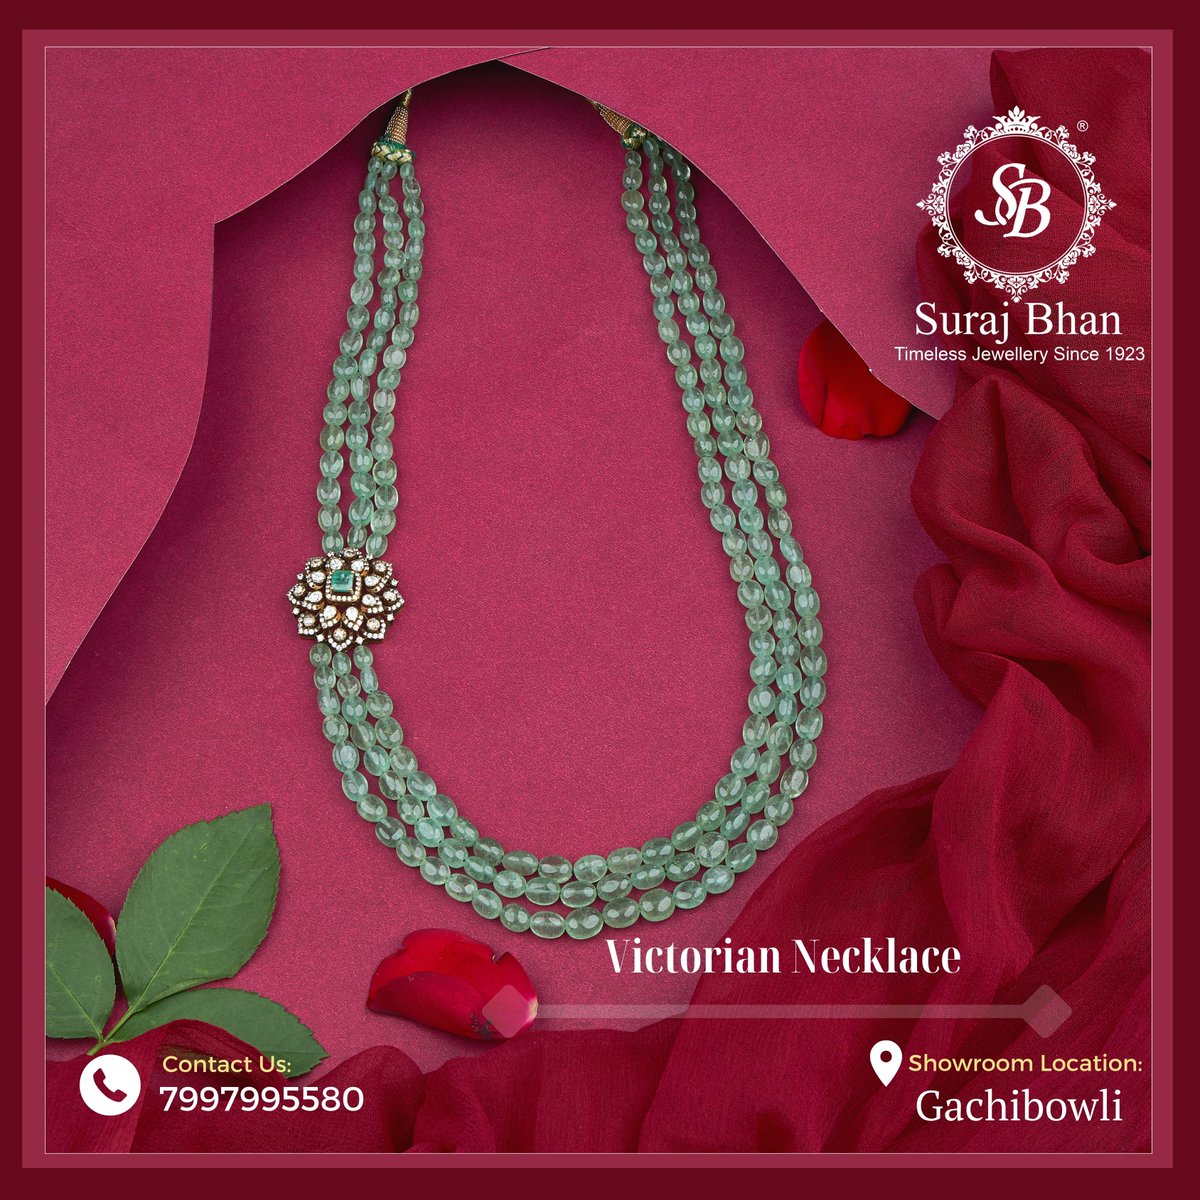 A Timeless Treasure: Adorn yourself with the exquisite elegance of this Victorian necklace, a radiant symbol of opulence and grace.
 For inquiries please contact-7997995580

#pearlhaaram #JewelryLove #ElegantJewelry #surajbhangachibowli #surajbhanjewelleryhub #victoriannecklace